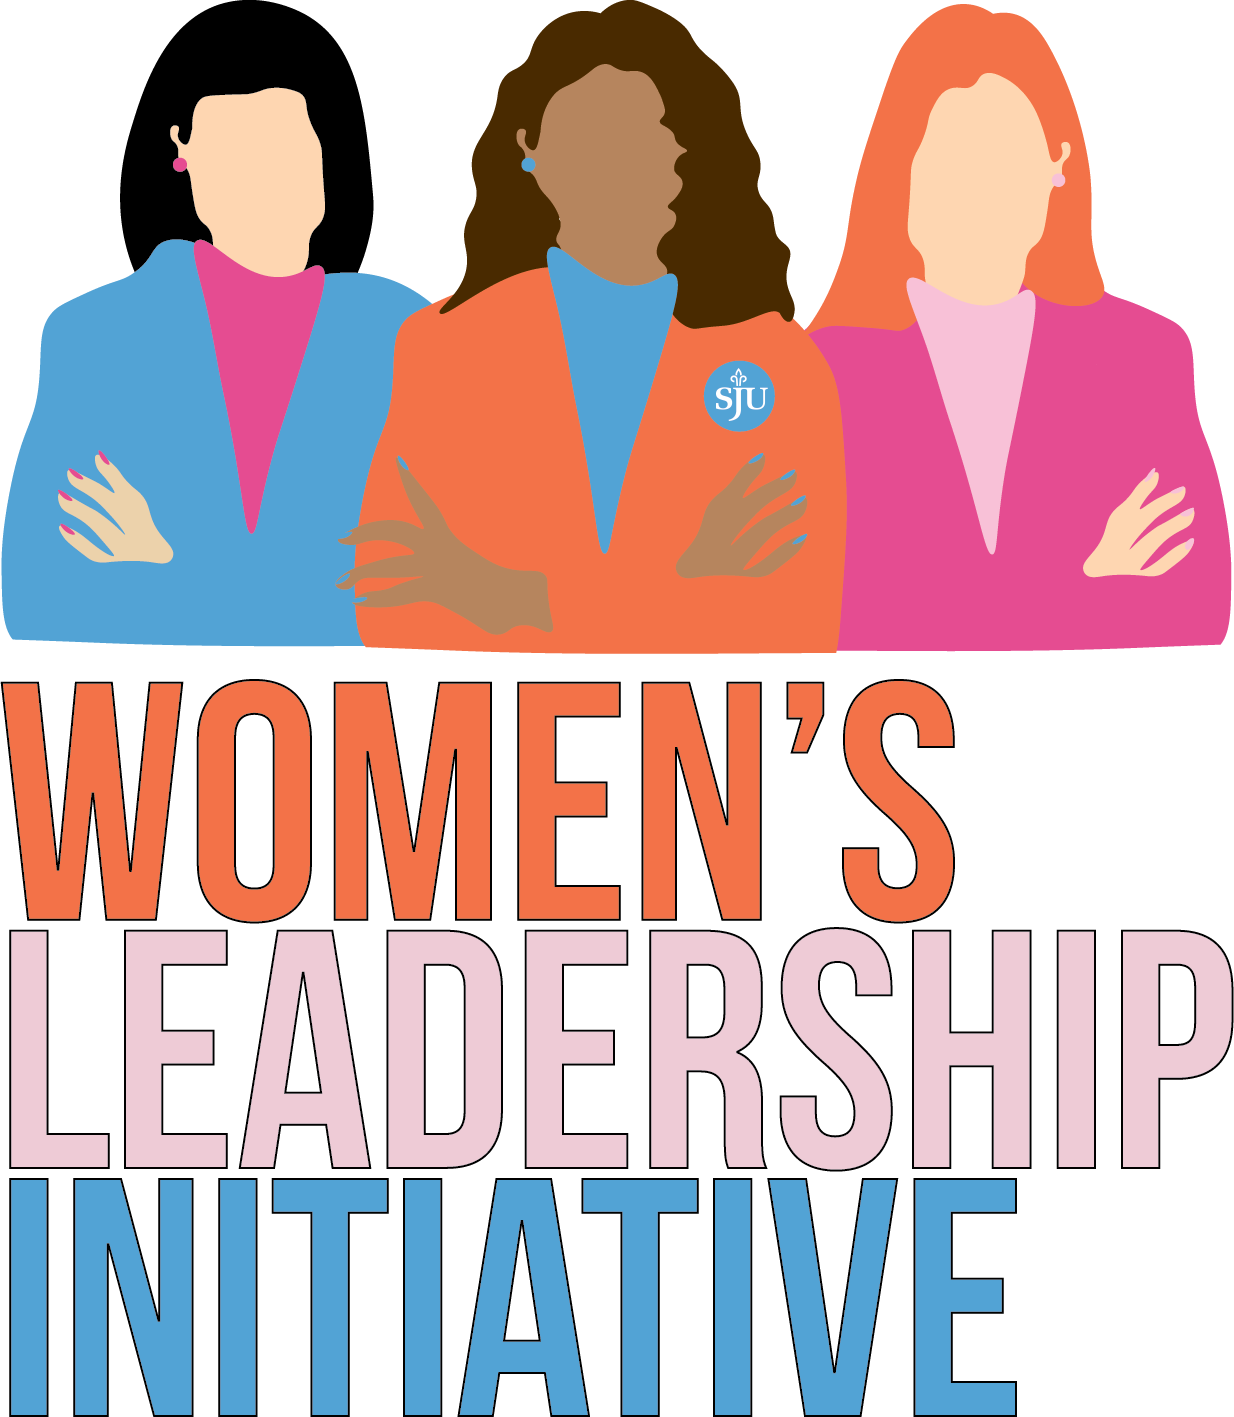 A vectored image including three women crossing their hands across their chest in a position of power. The design uses the colors hot pink, blue, orange, light pink, brown and tan. The words: Women's Leadership Initiative fall under the design